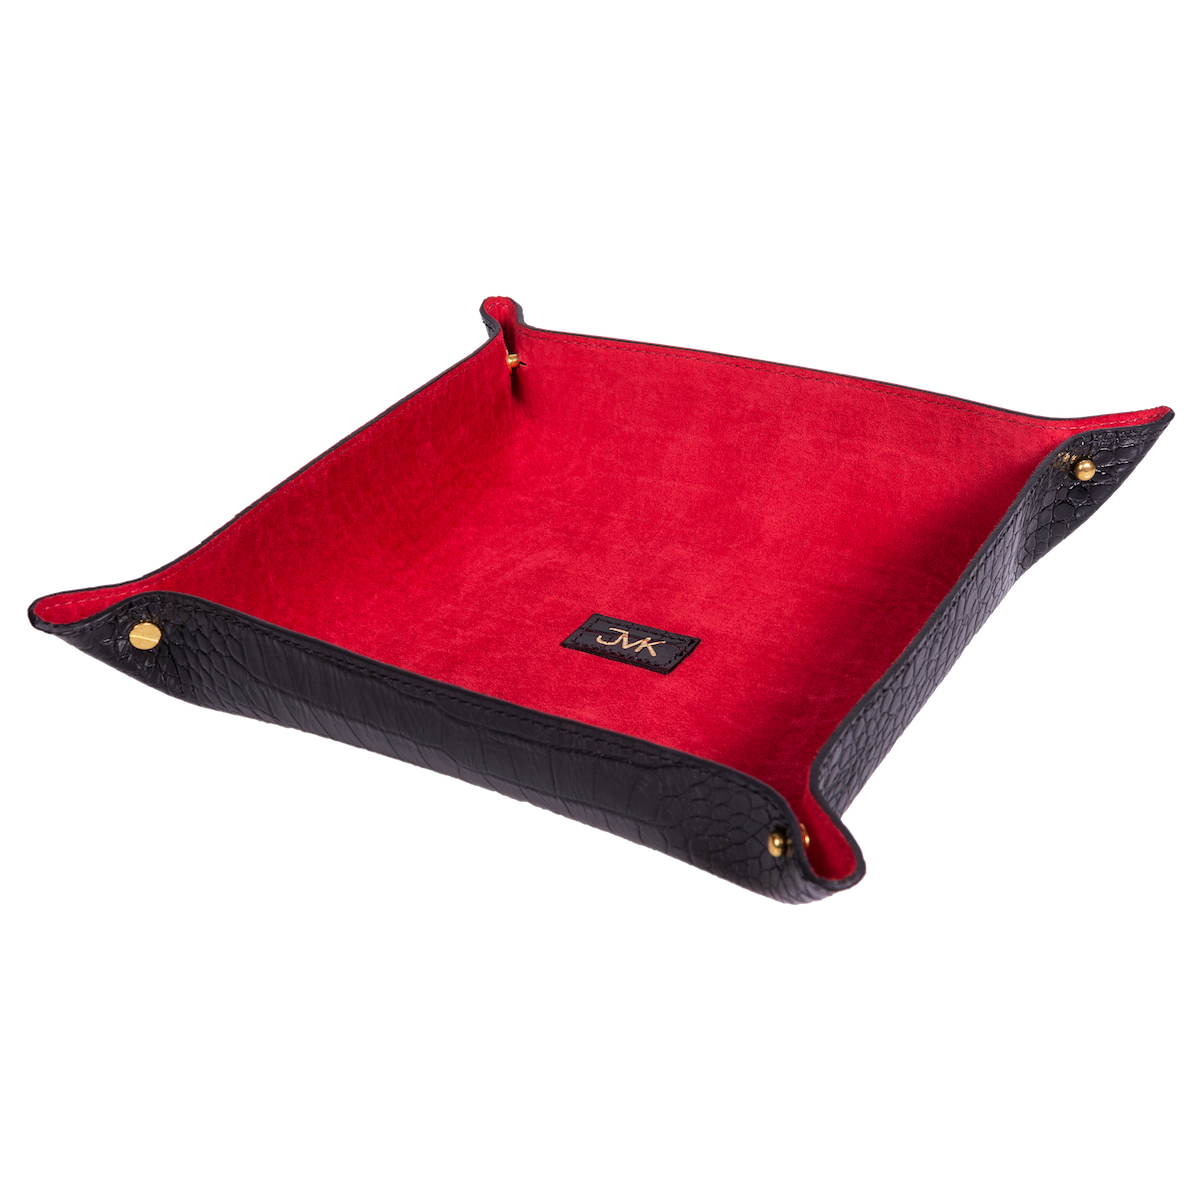 Change Tray, Croco Leather Black/Red, MAISON JMK-VONMEL Luxe Gifts